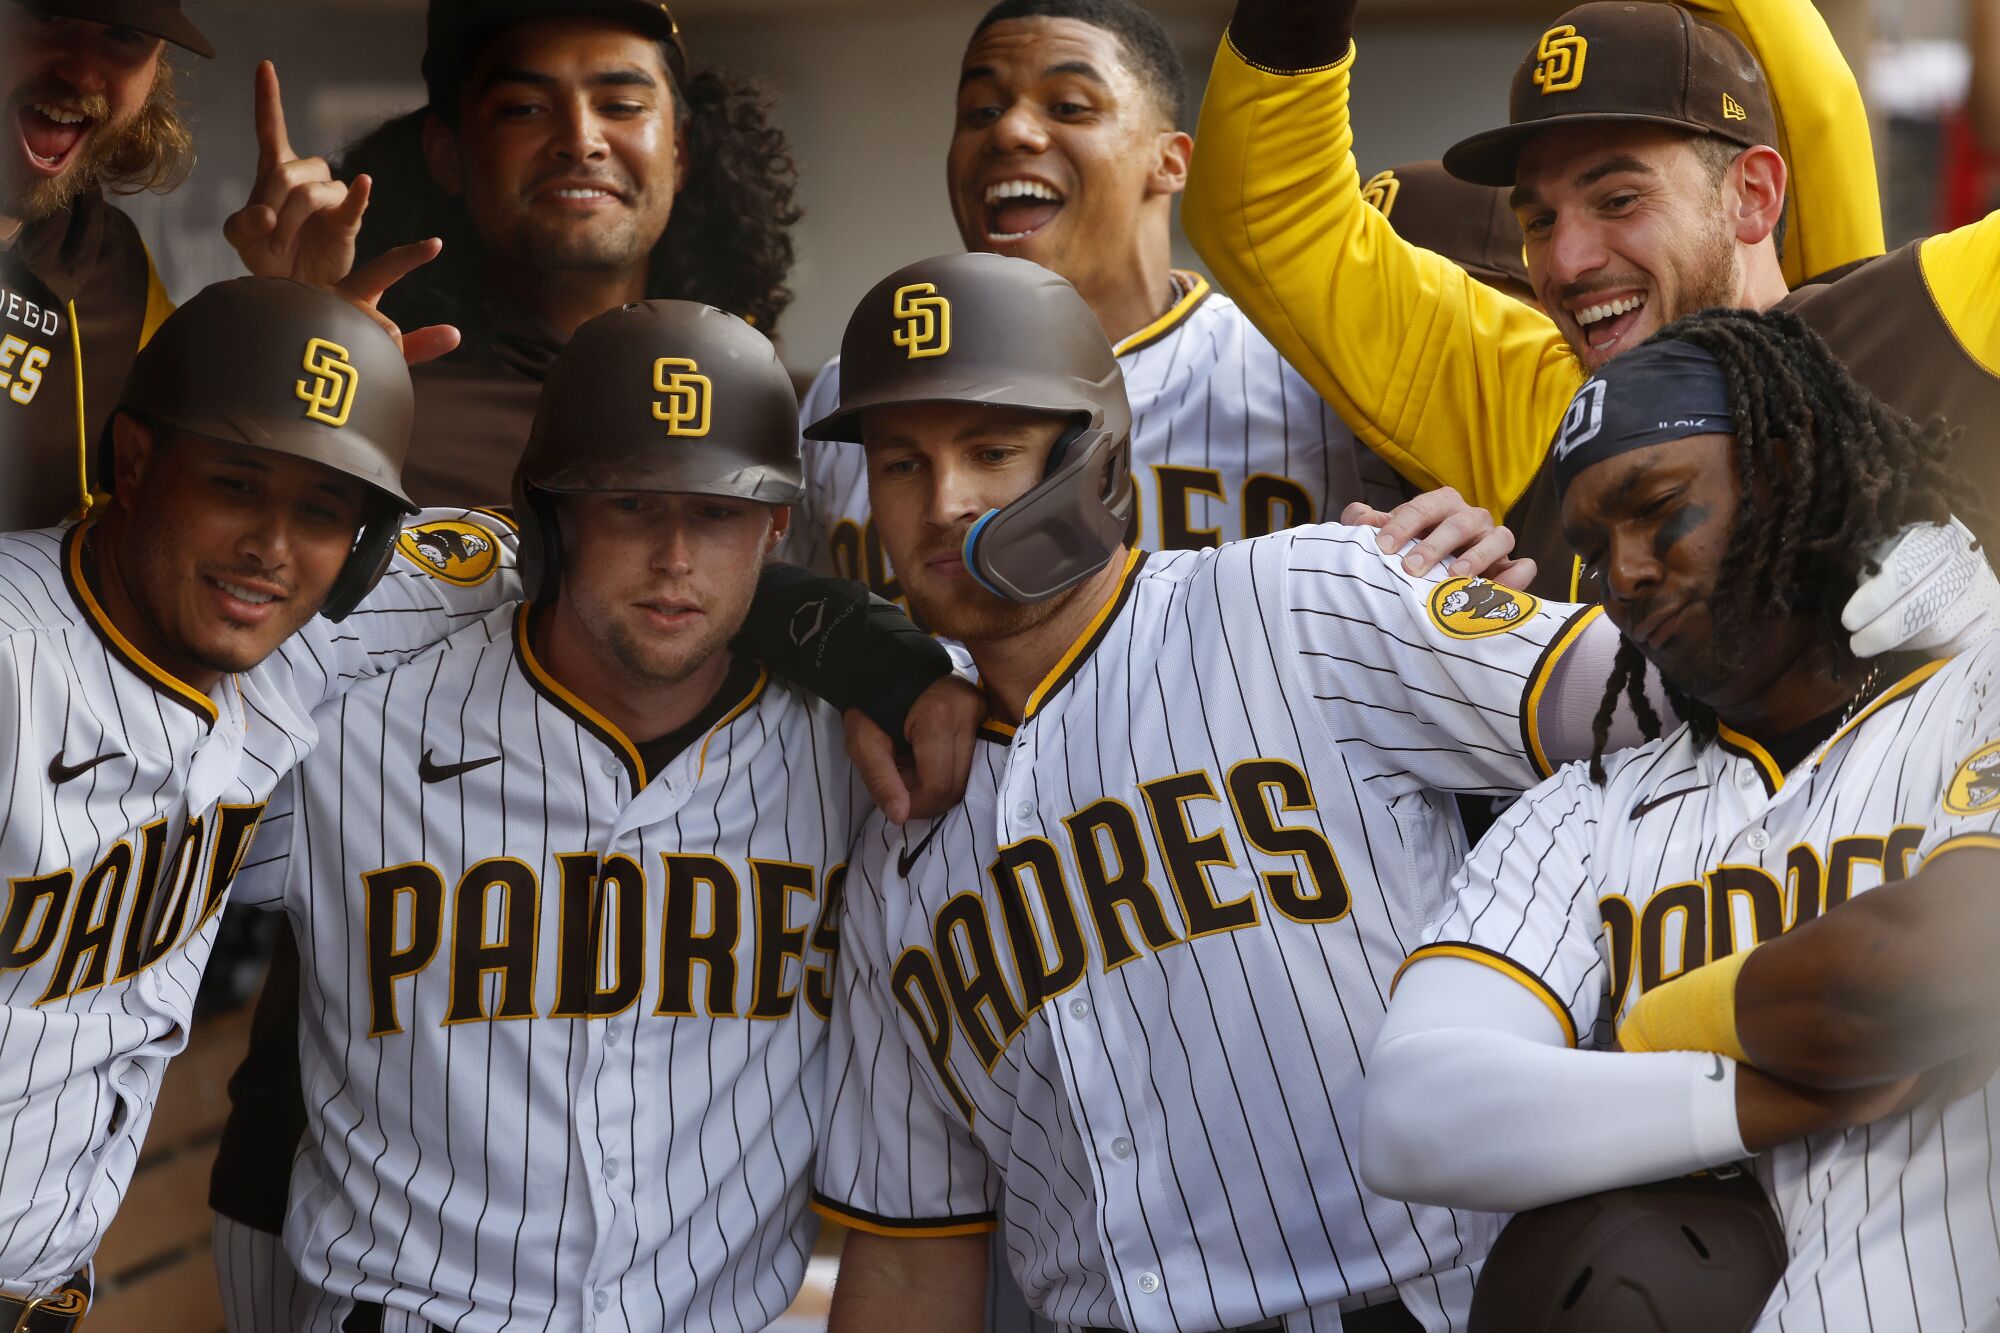 Padres players surround Brandon Drury, center, for a photo after he